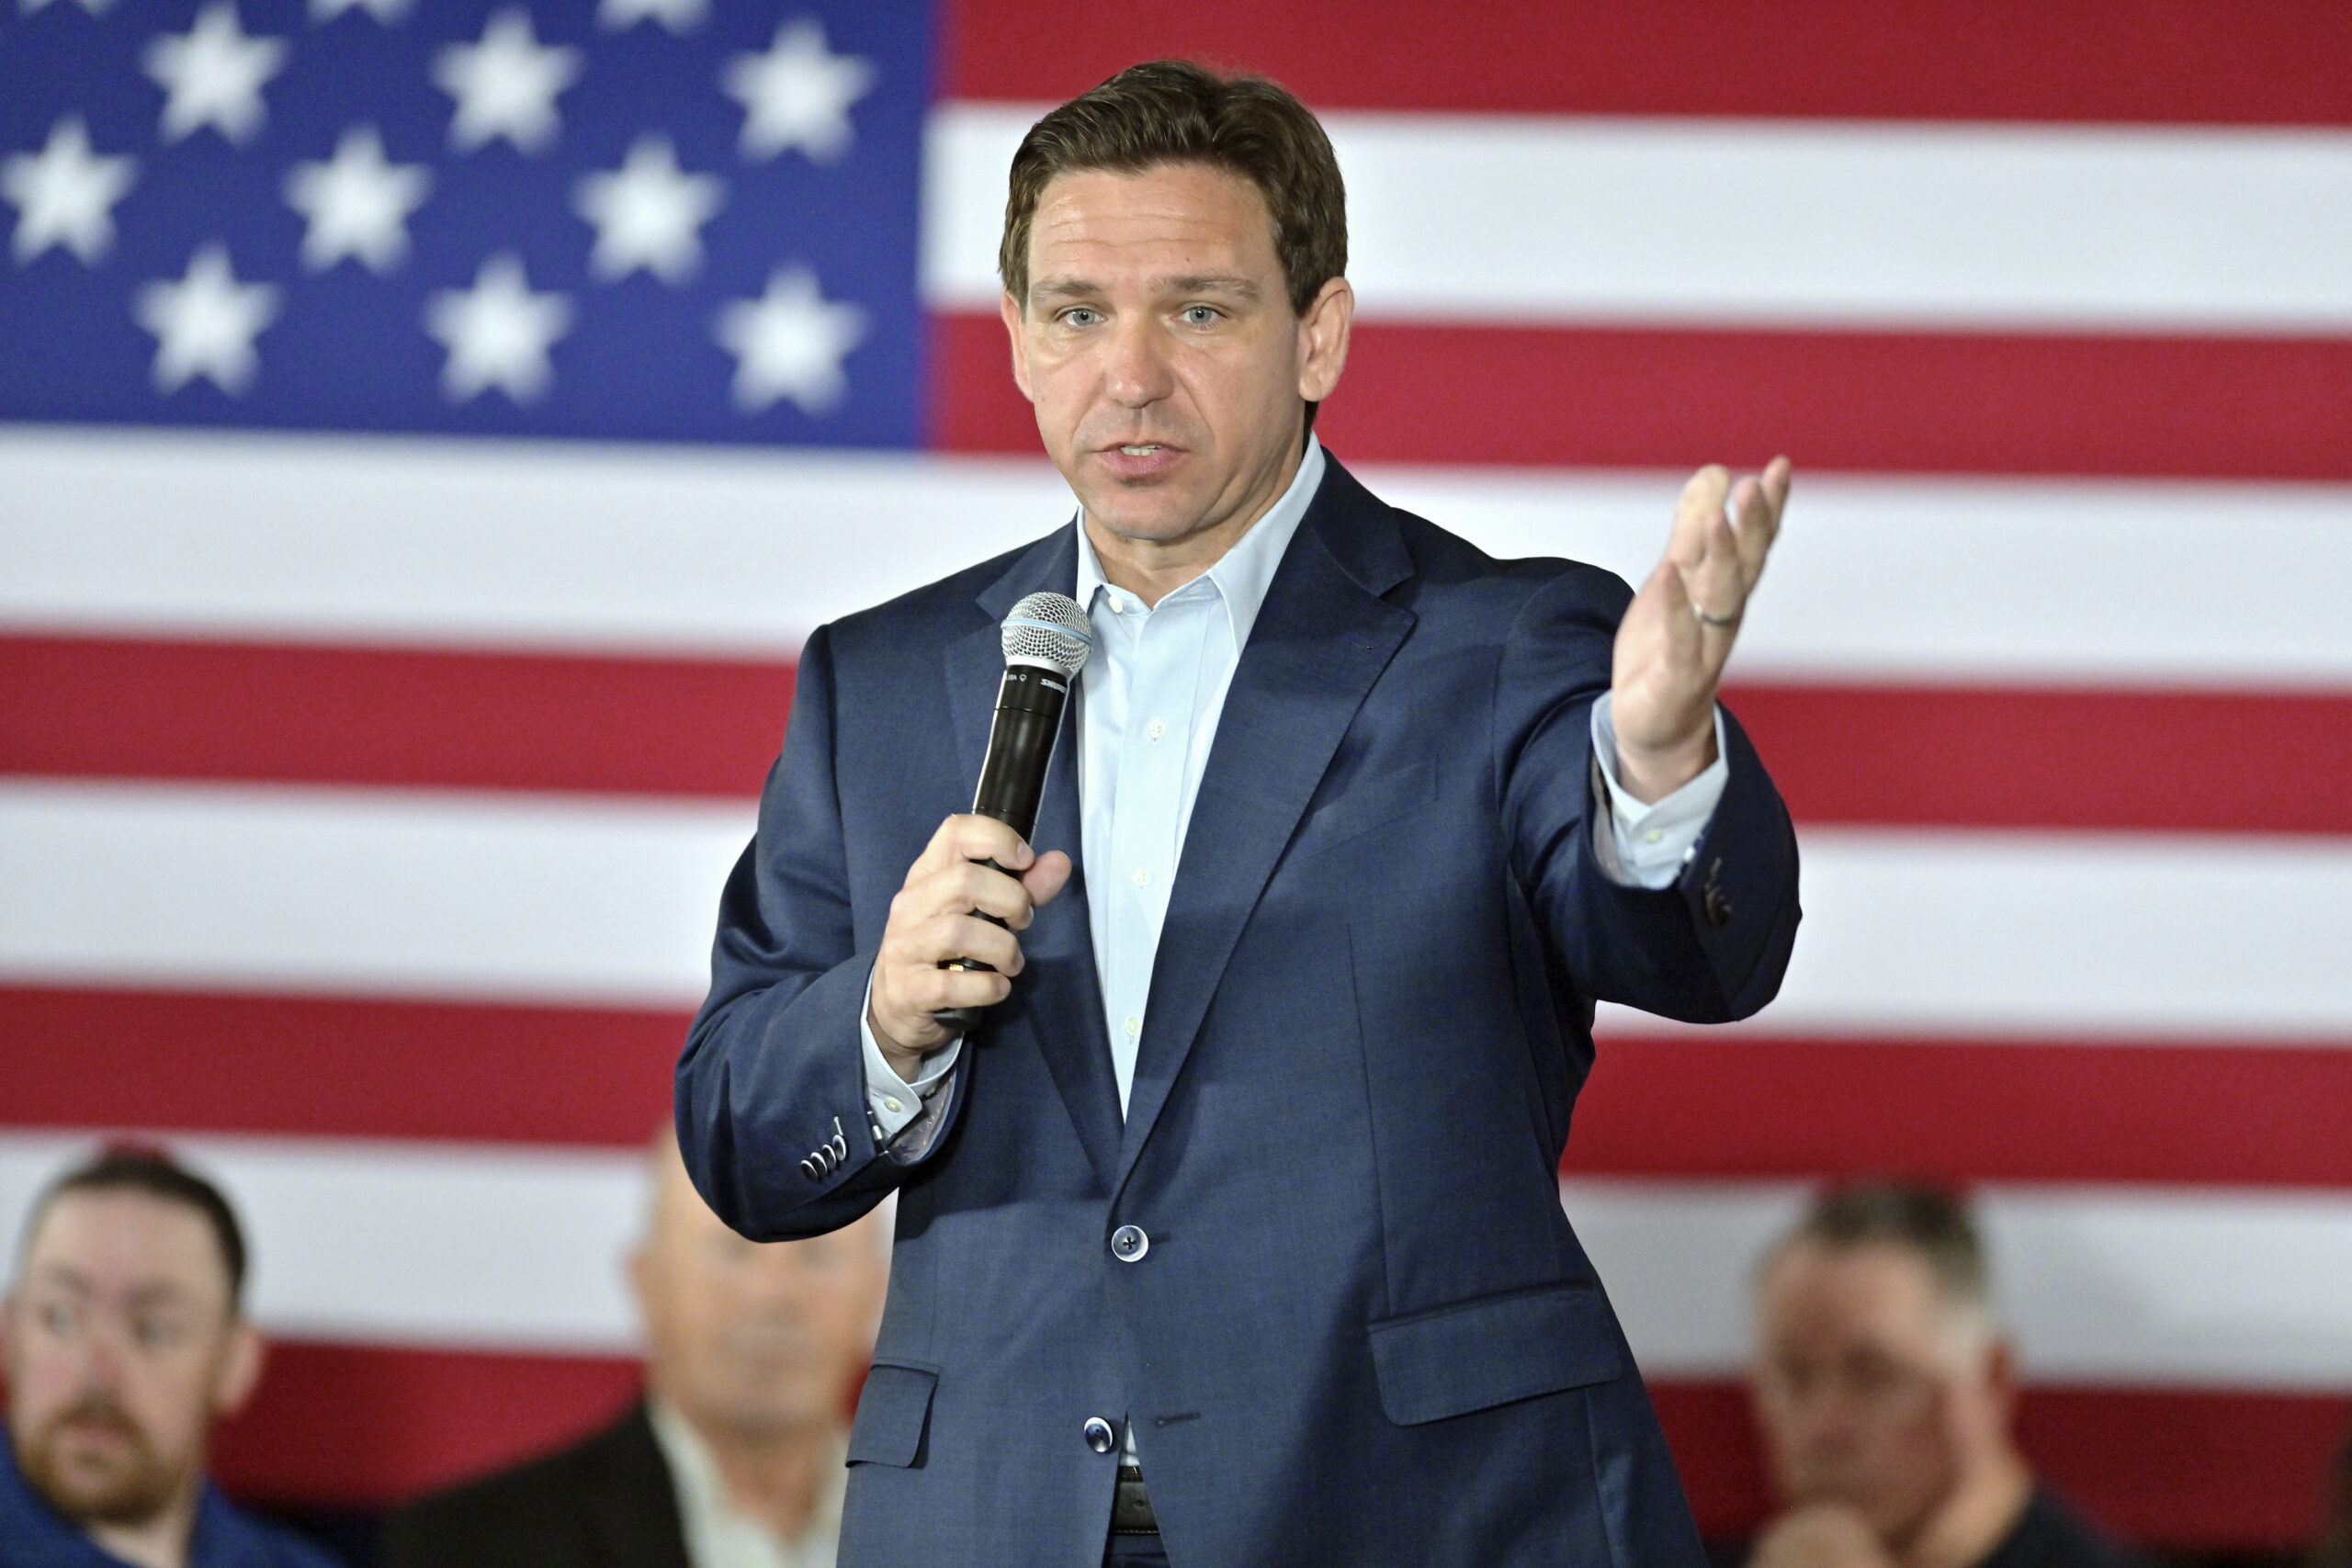 DeSantis sparks local GOP backlash with his New York fundraiser